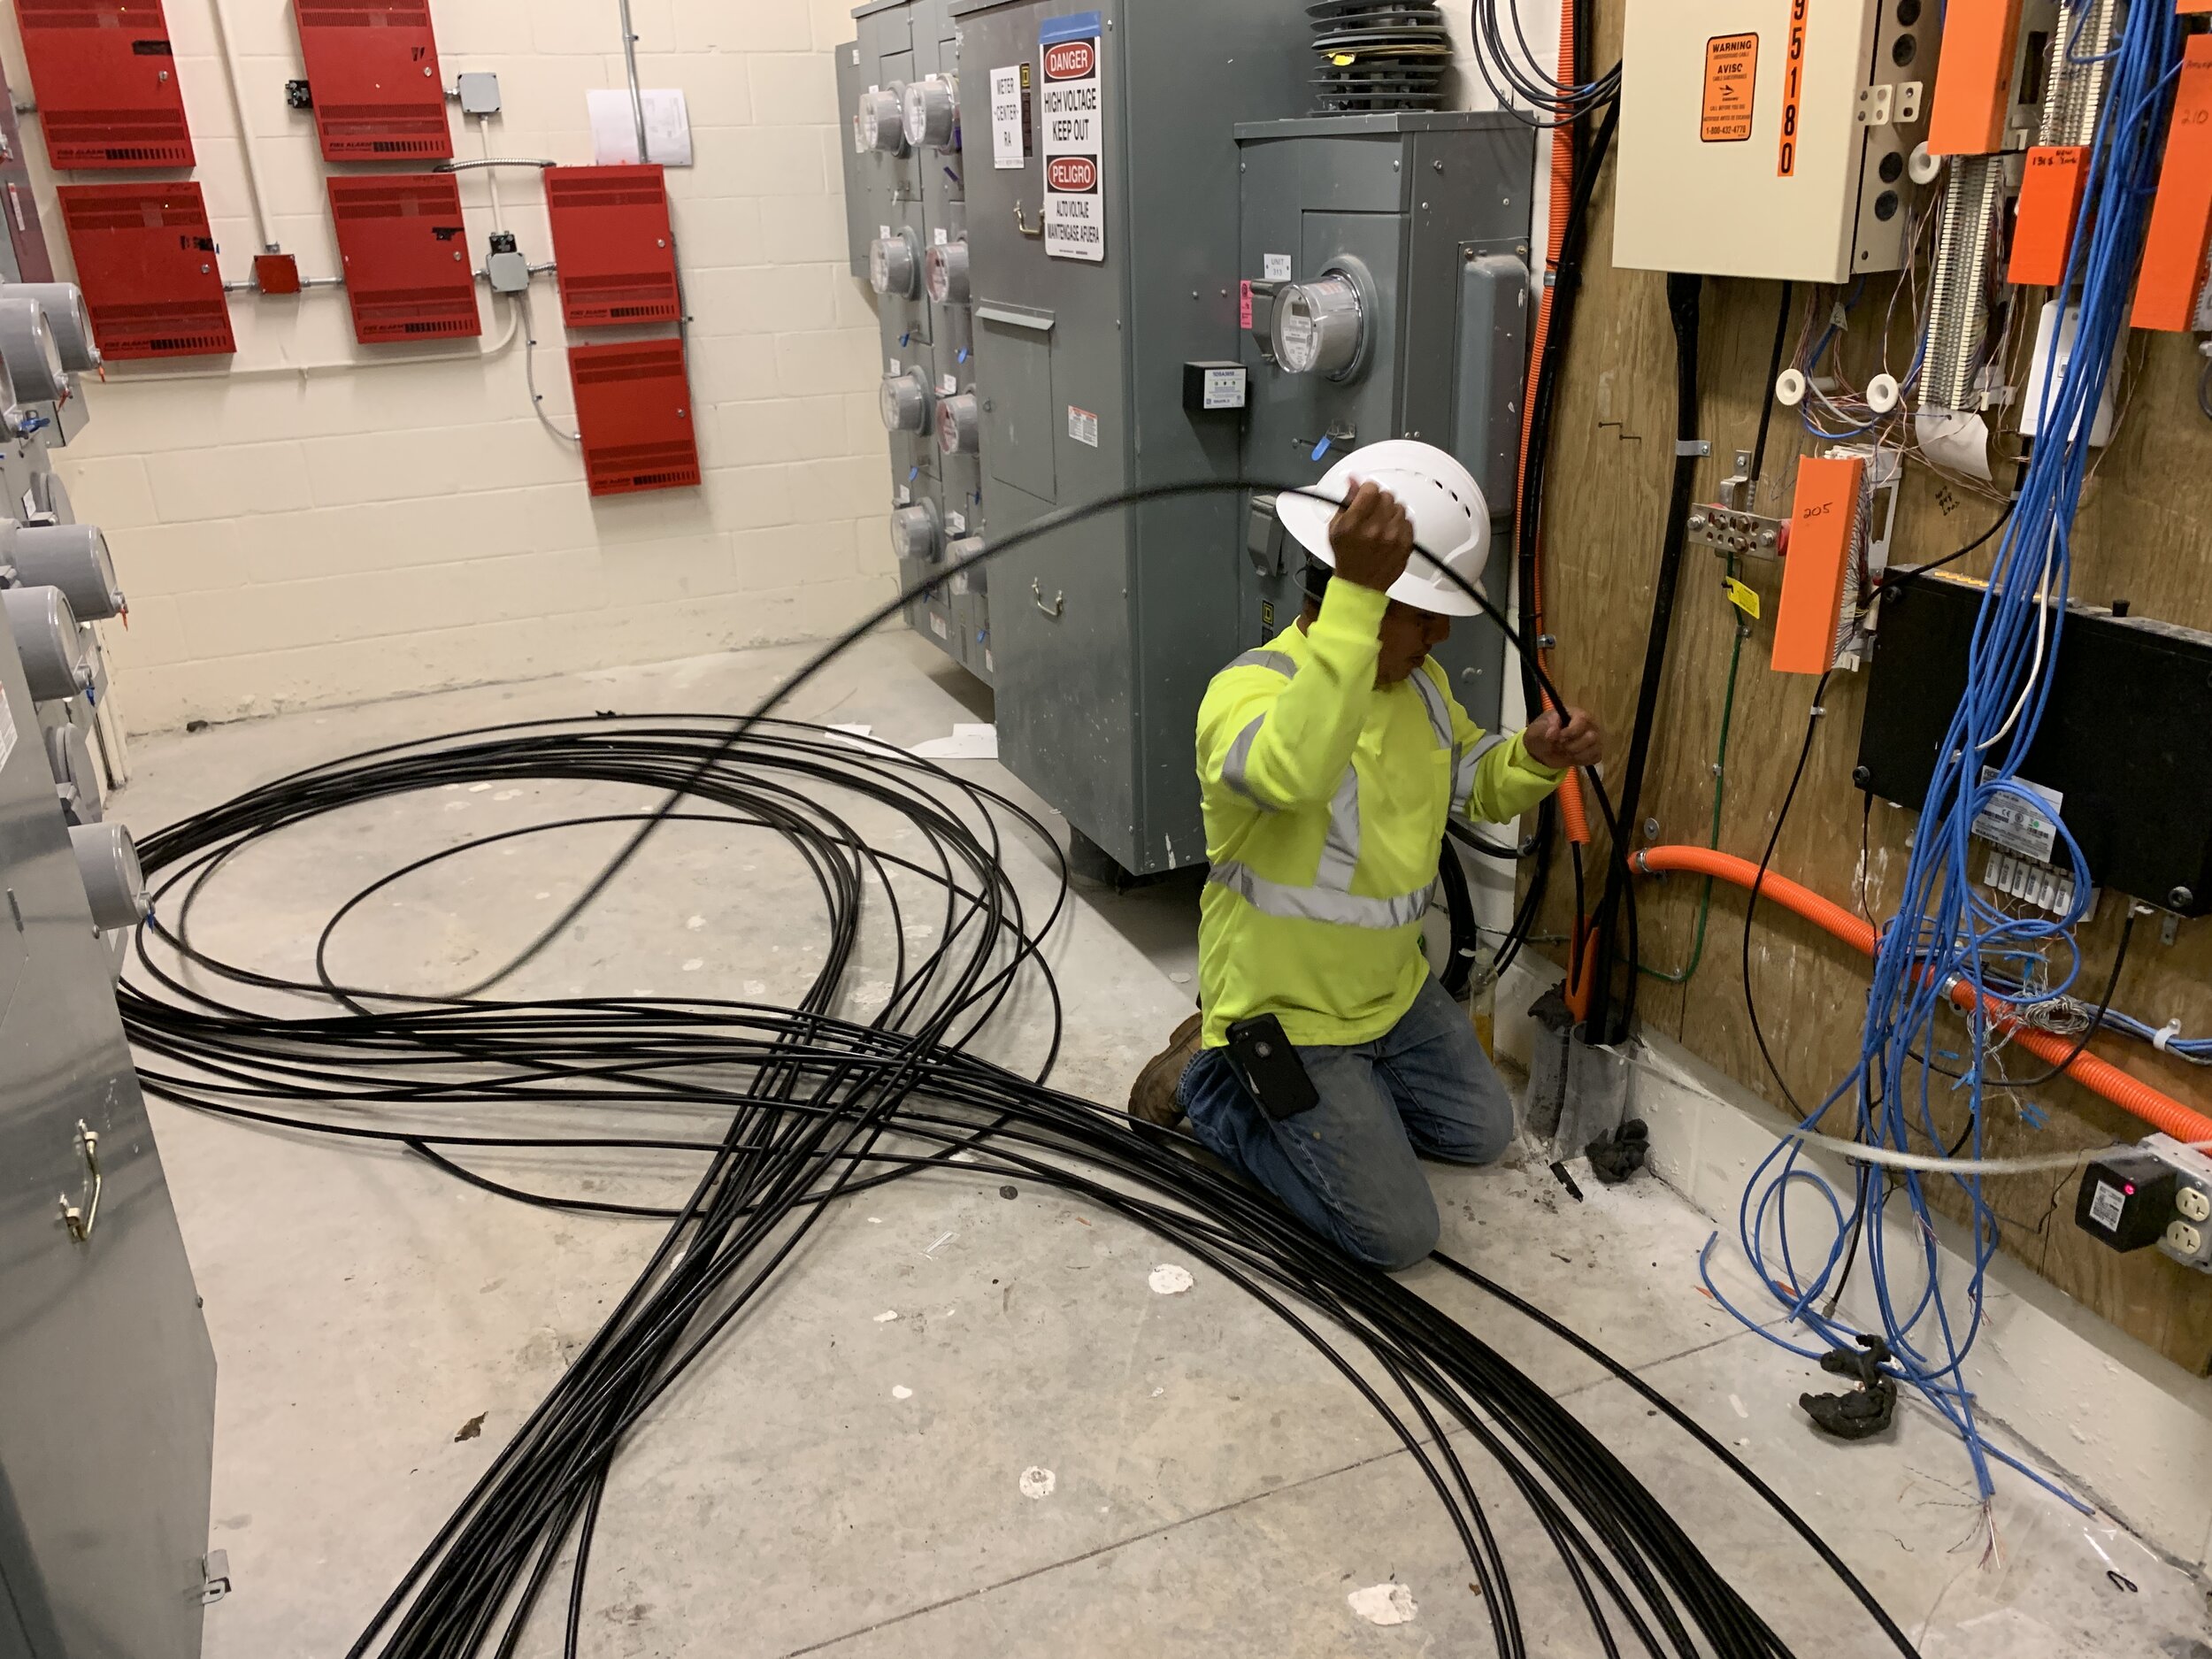 Installation of our second gigabit fiber connection.